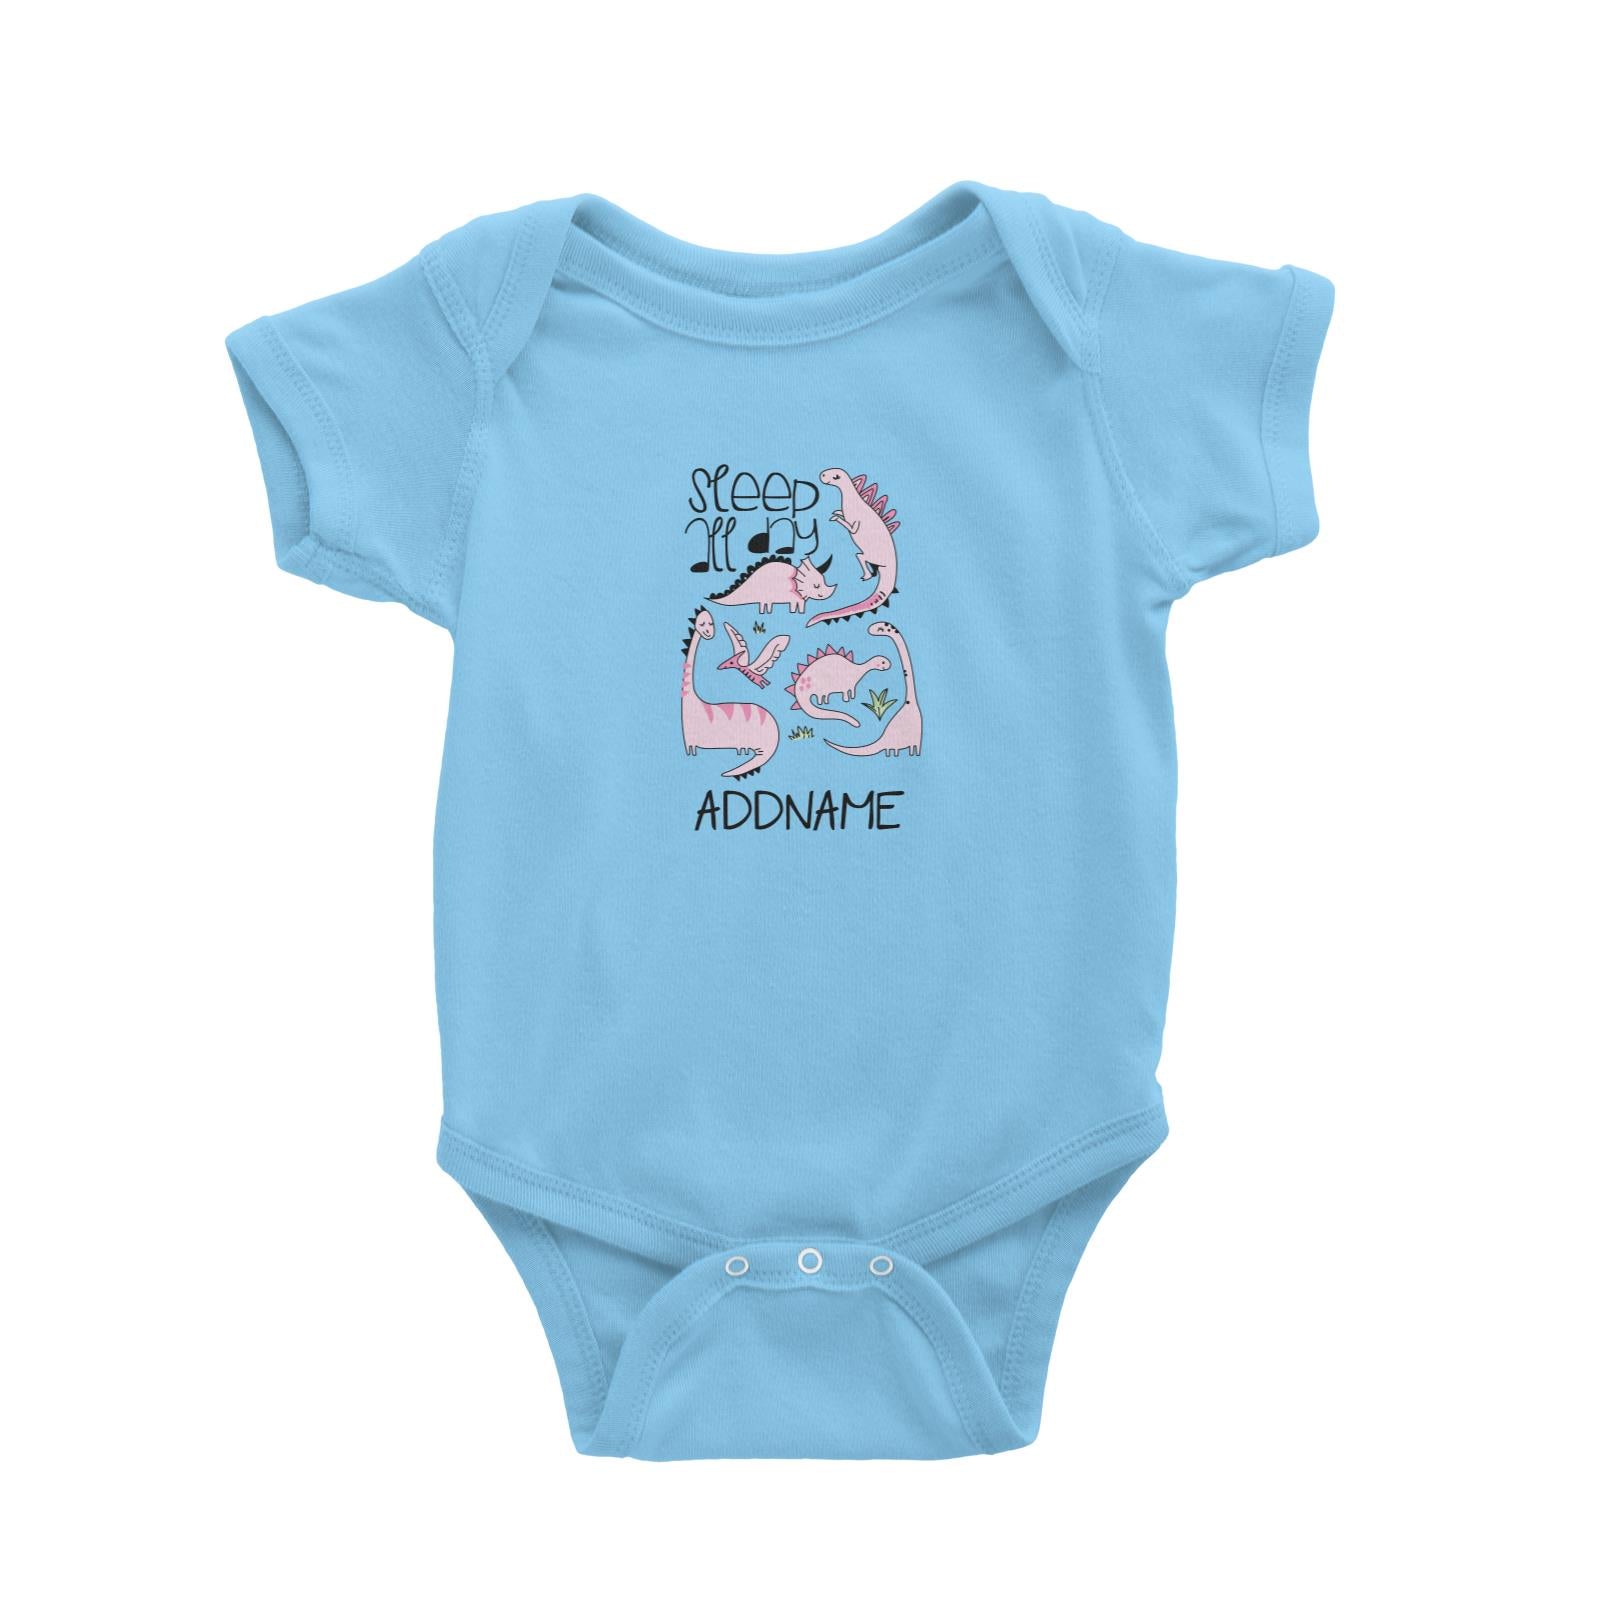 Cool Vibrant Series Sleep All Day Dinosaur Addname Baby Romper